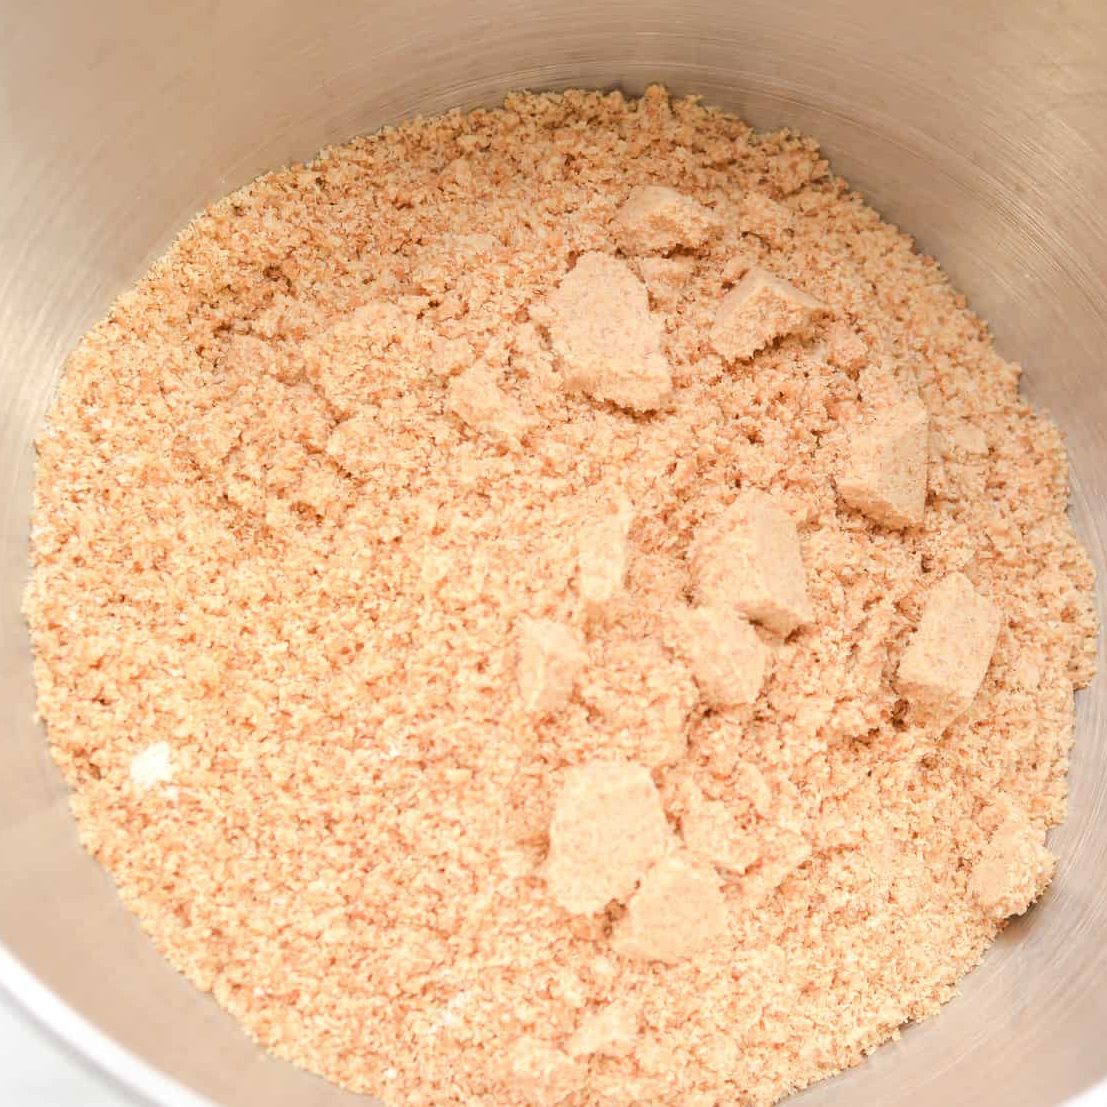 In a mixing bowl, add the almond flour.